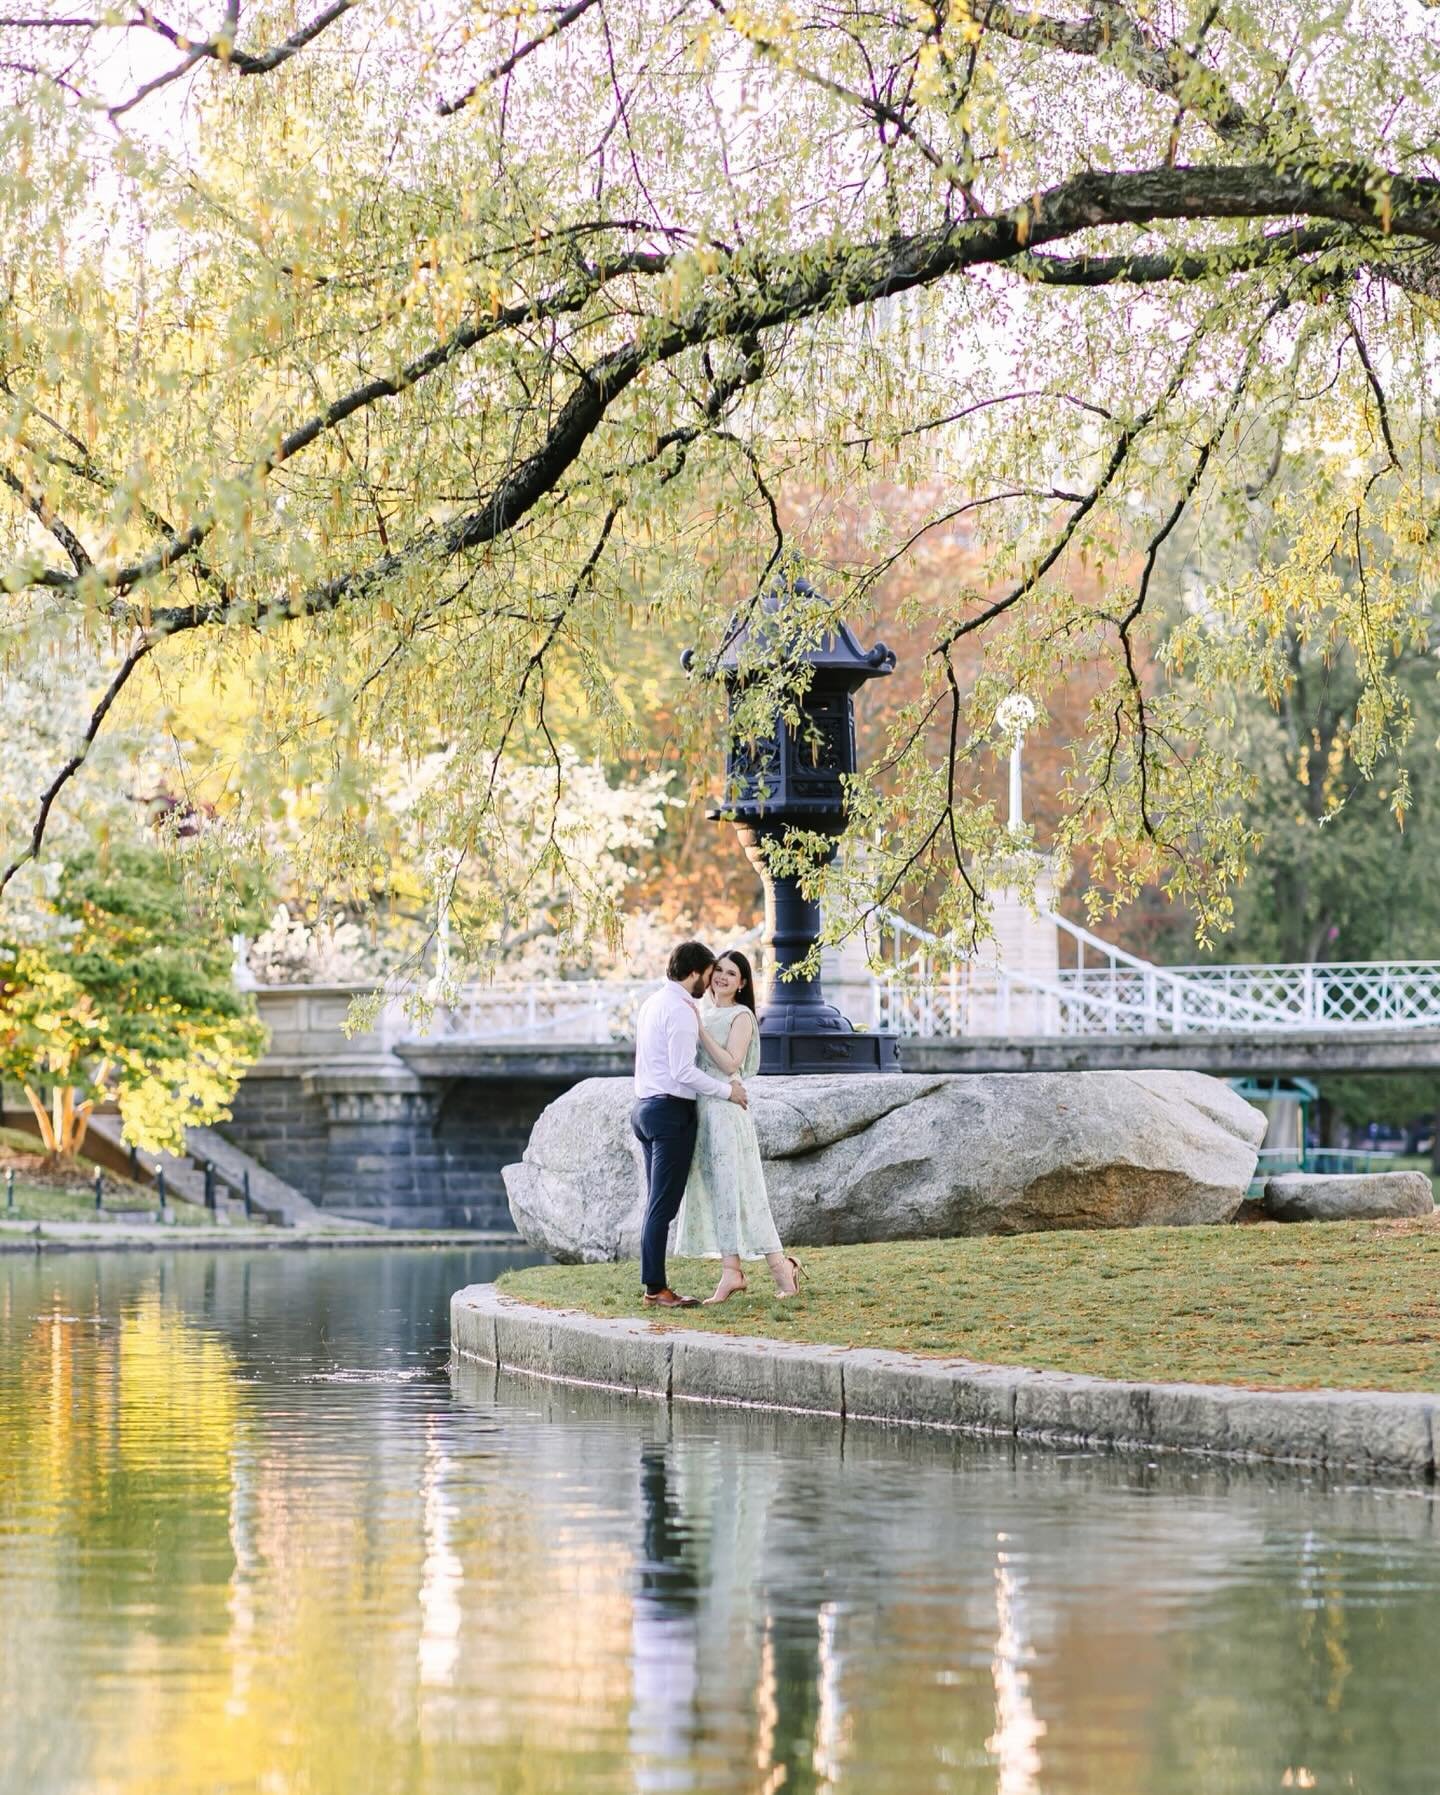 Another sunrise engagement session, bopping around Boston. It was a little chilly, especially for Bryan who is an Arizona native. We began at the esplanade, strolled through the Public Garden on our way to Acorn St.

What a great start to the weekend